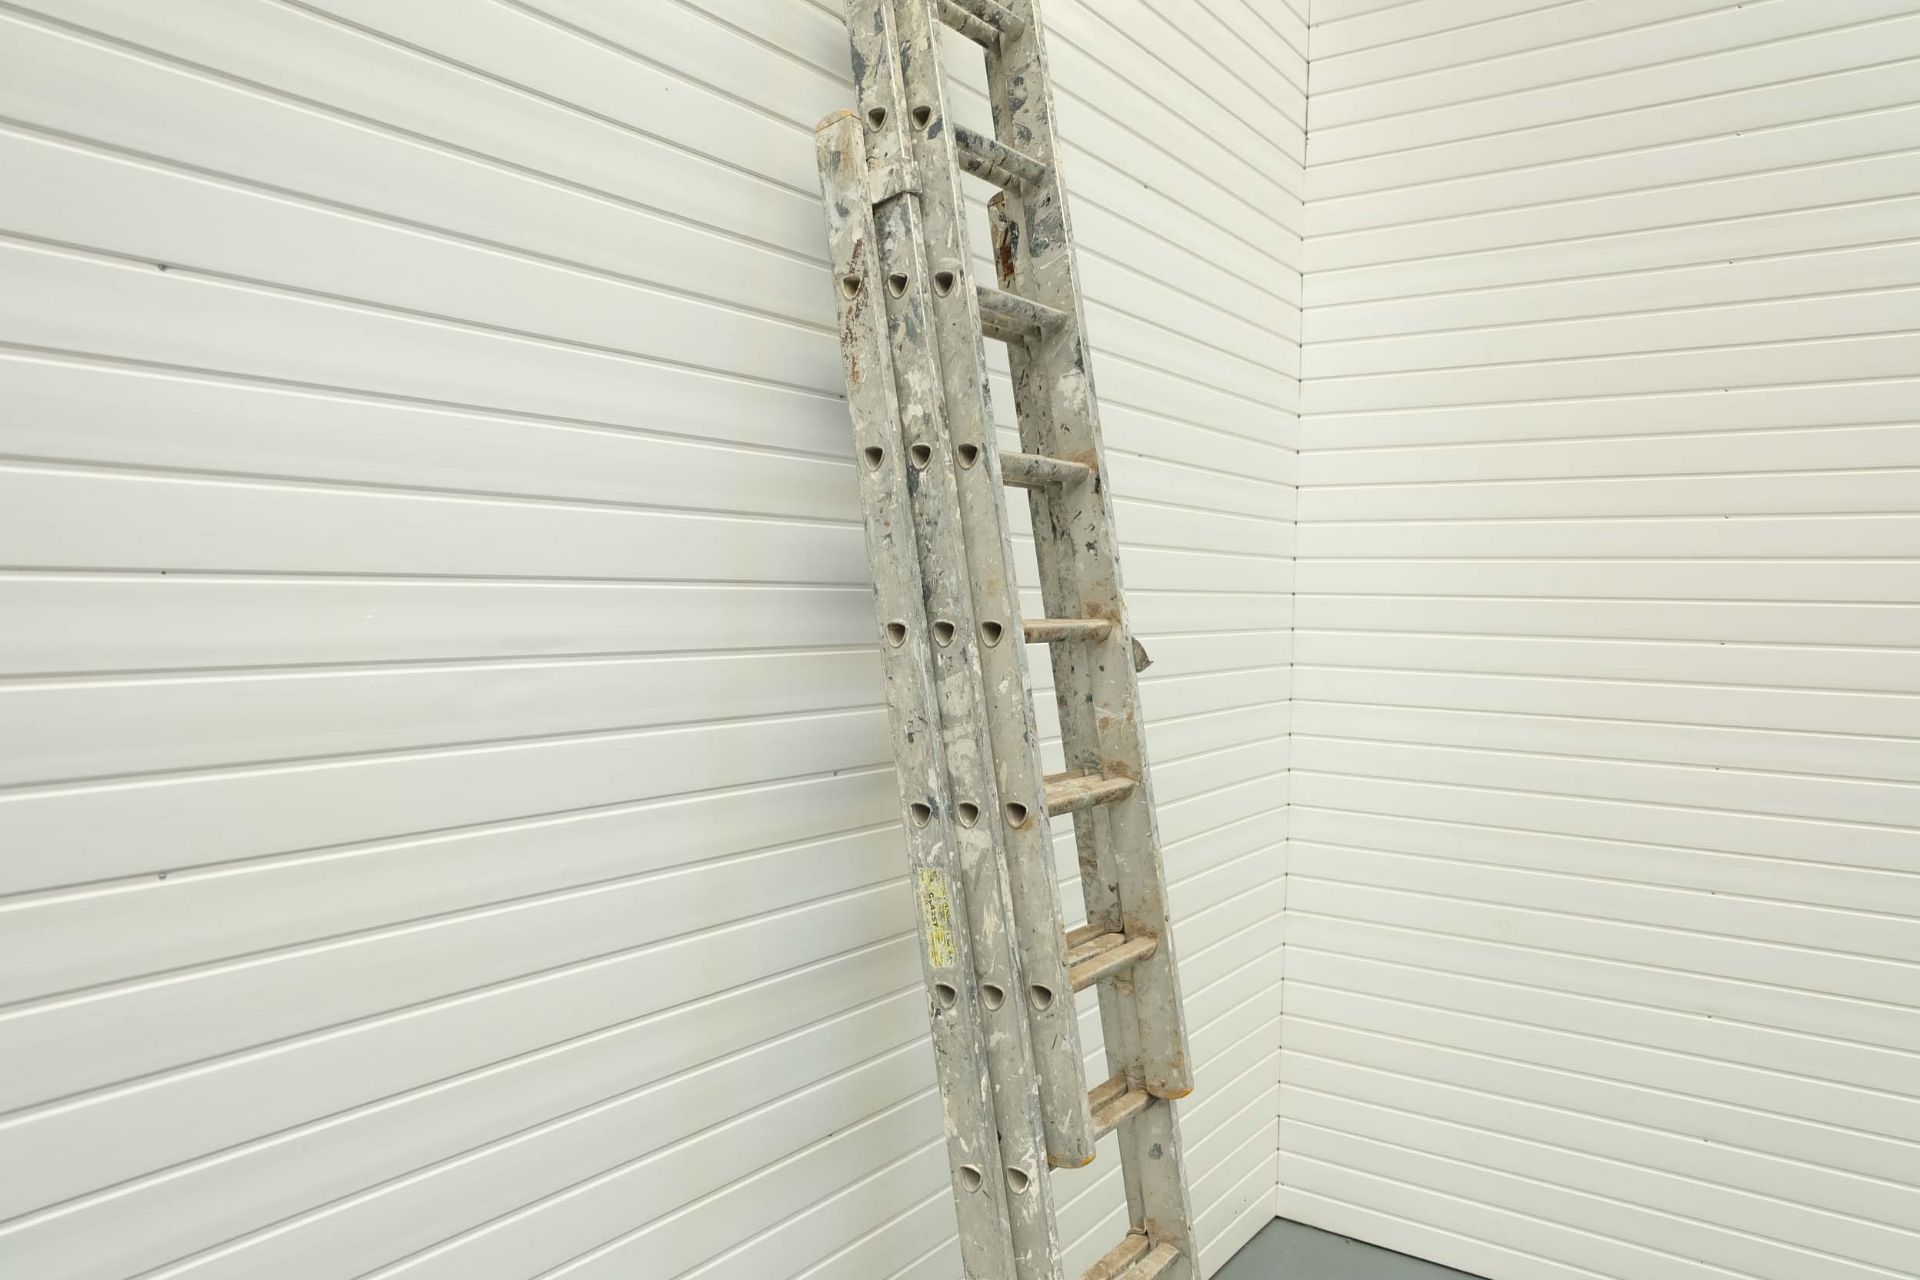 Triple Extension Aluminium Ladder. Length: 2.5 Mtr to 5.6 Mtr. Max Load: 150Kg. - Image 4 of 6